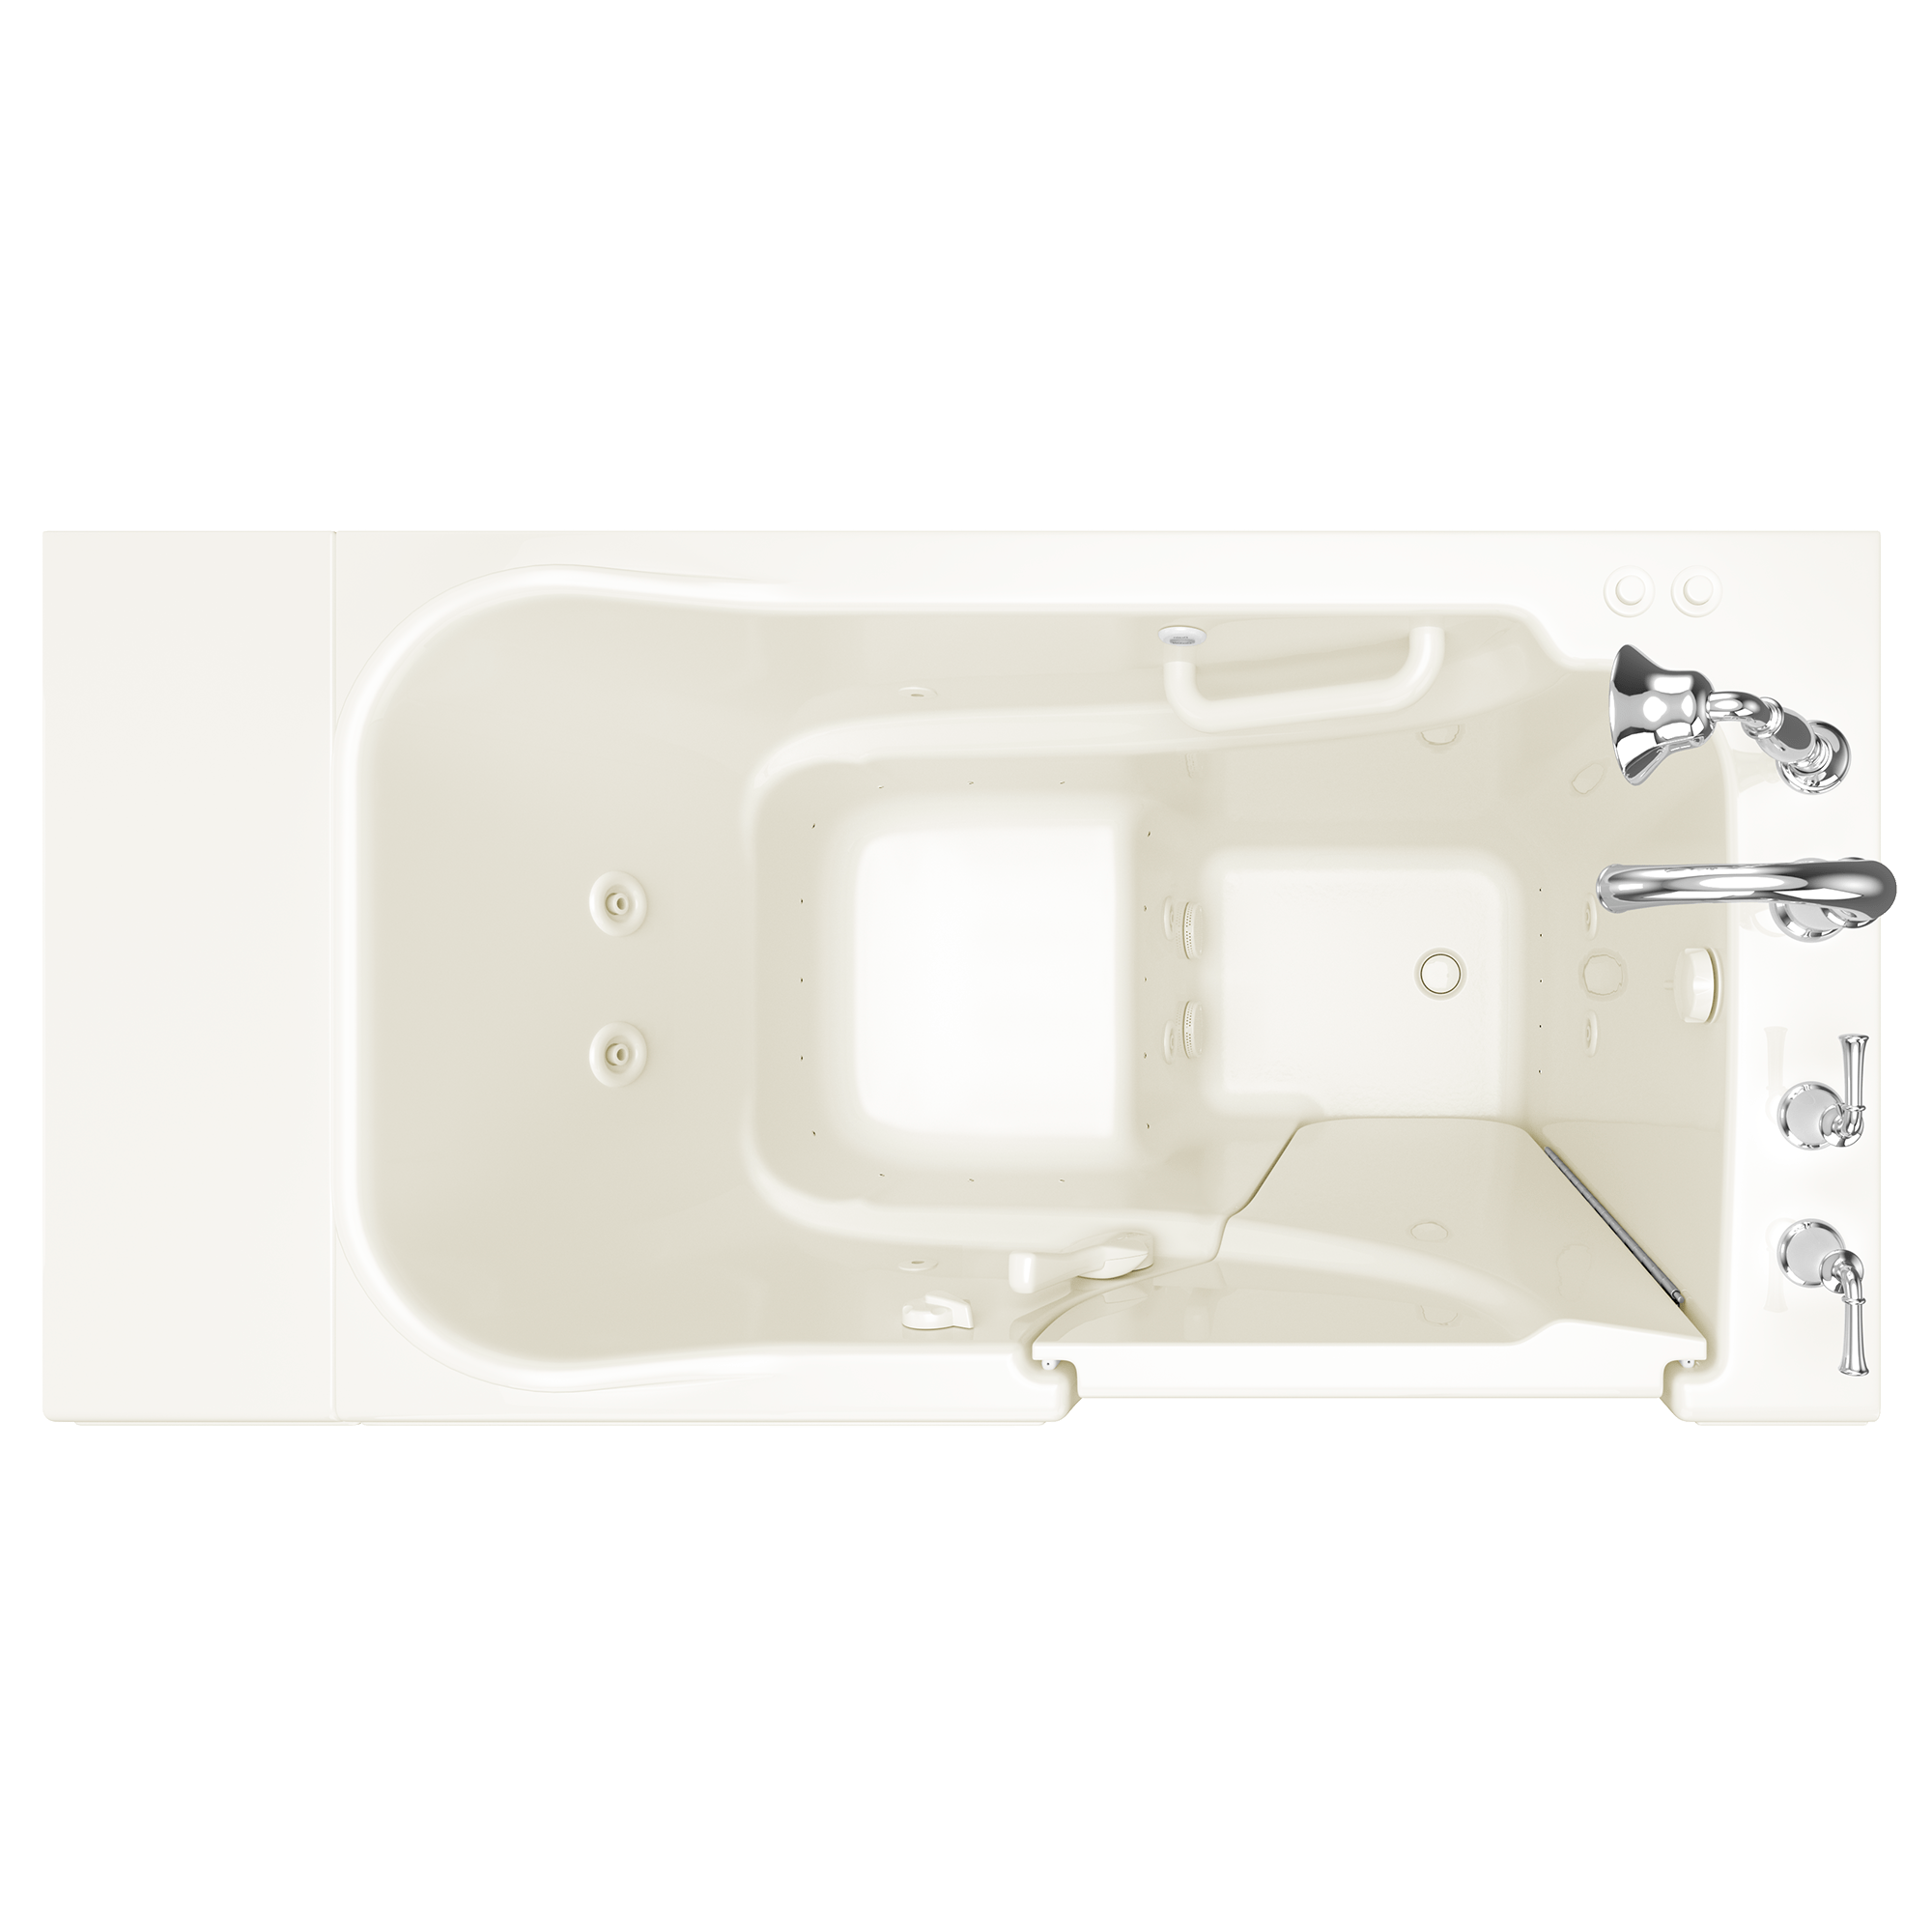 Gelcoat Value Series 30 x 52  Inch Walk in Tub With Combination Air Spa and Whirlpool Systems   Right Hand Drain With Faucet WIB LINEN